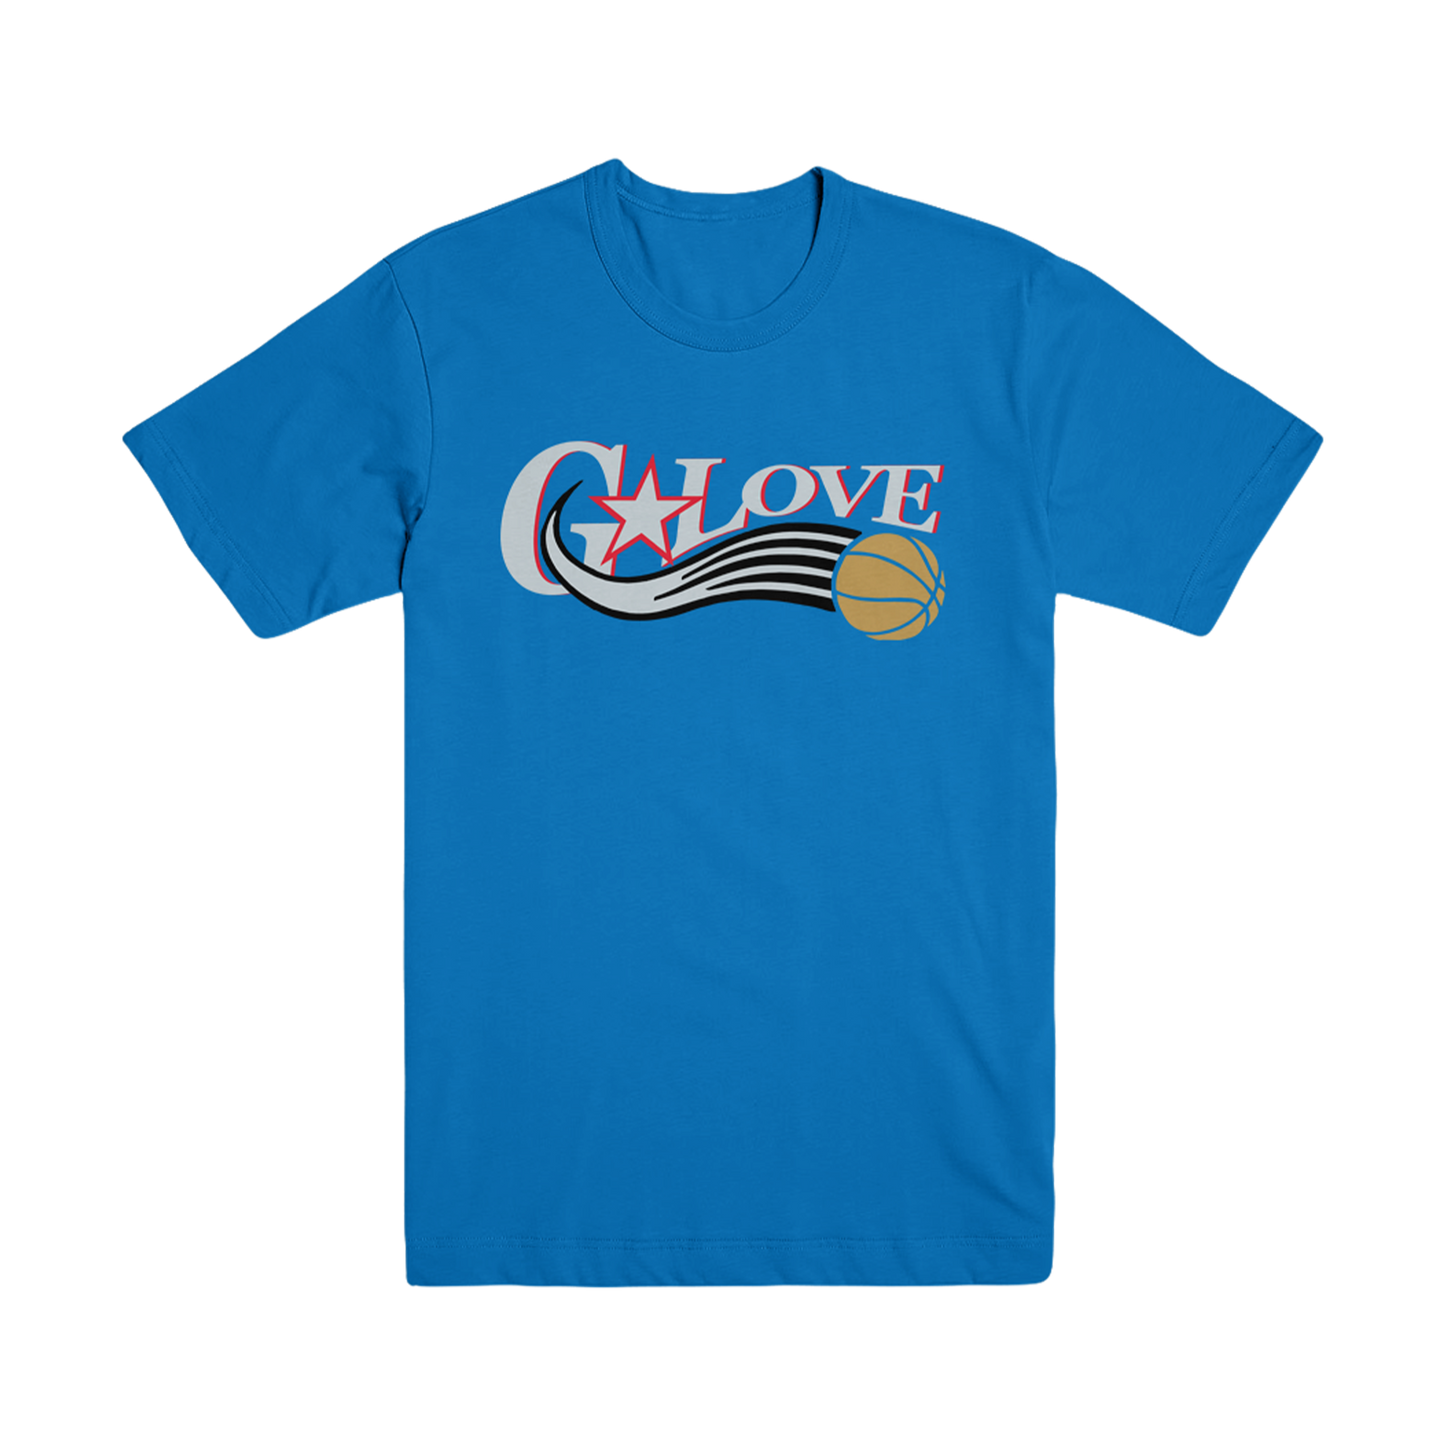 Sixers Tee (Royal Blue)